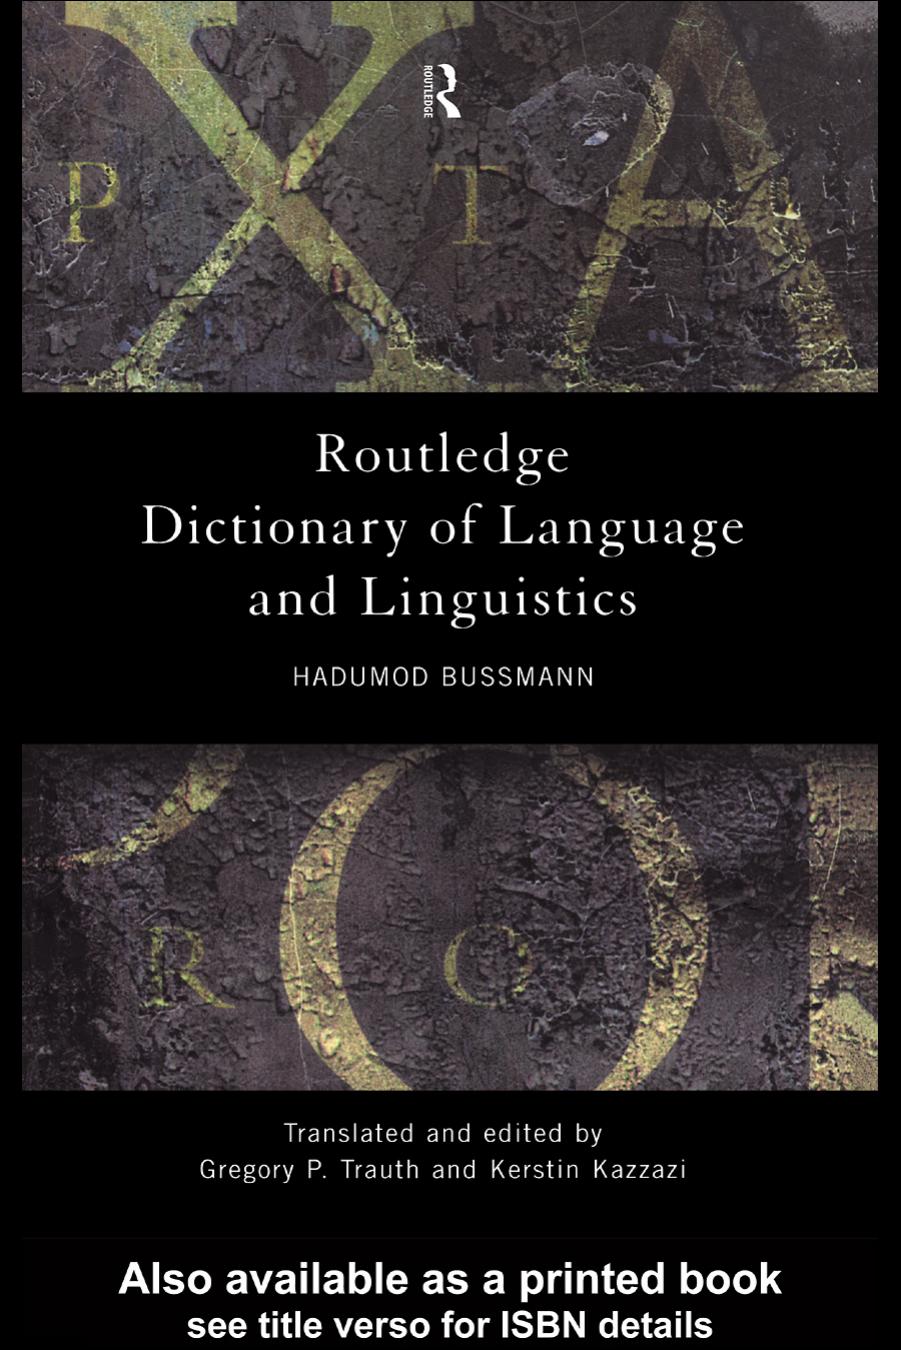 Routledge dictionary of language and linguistics